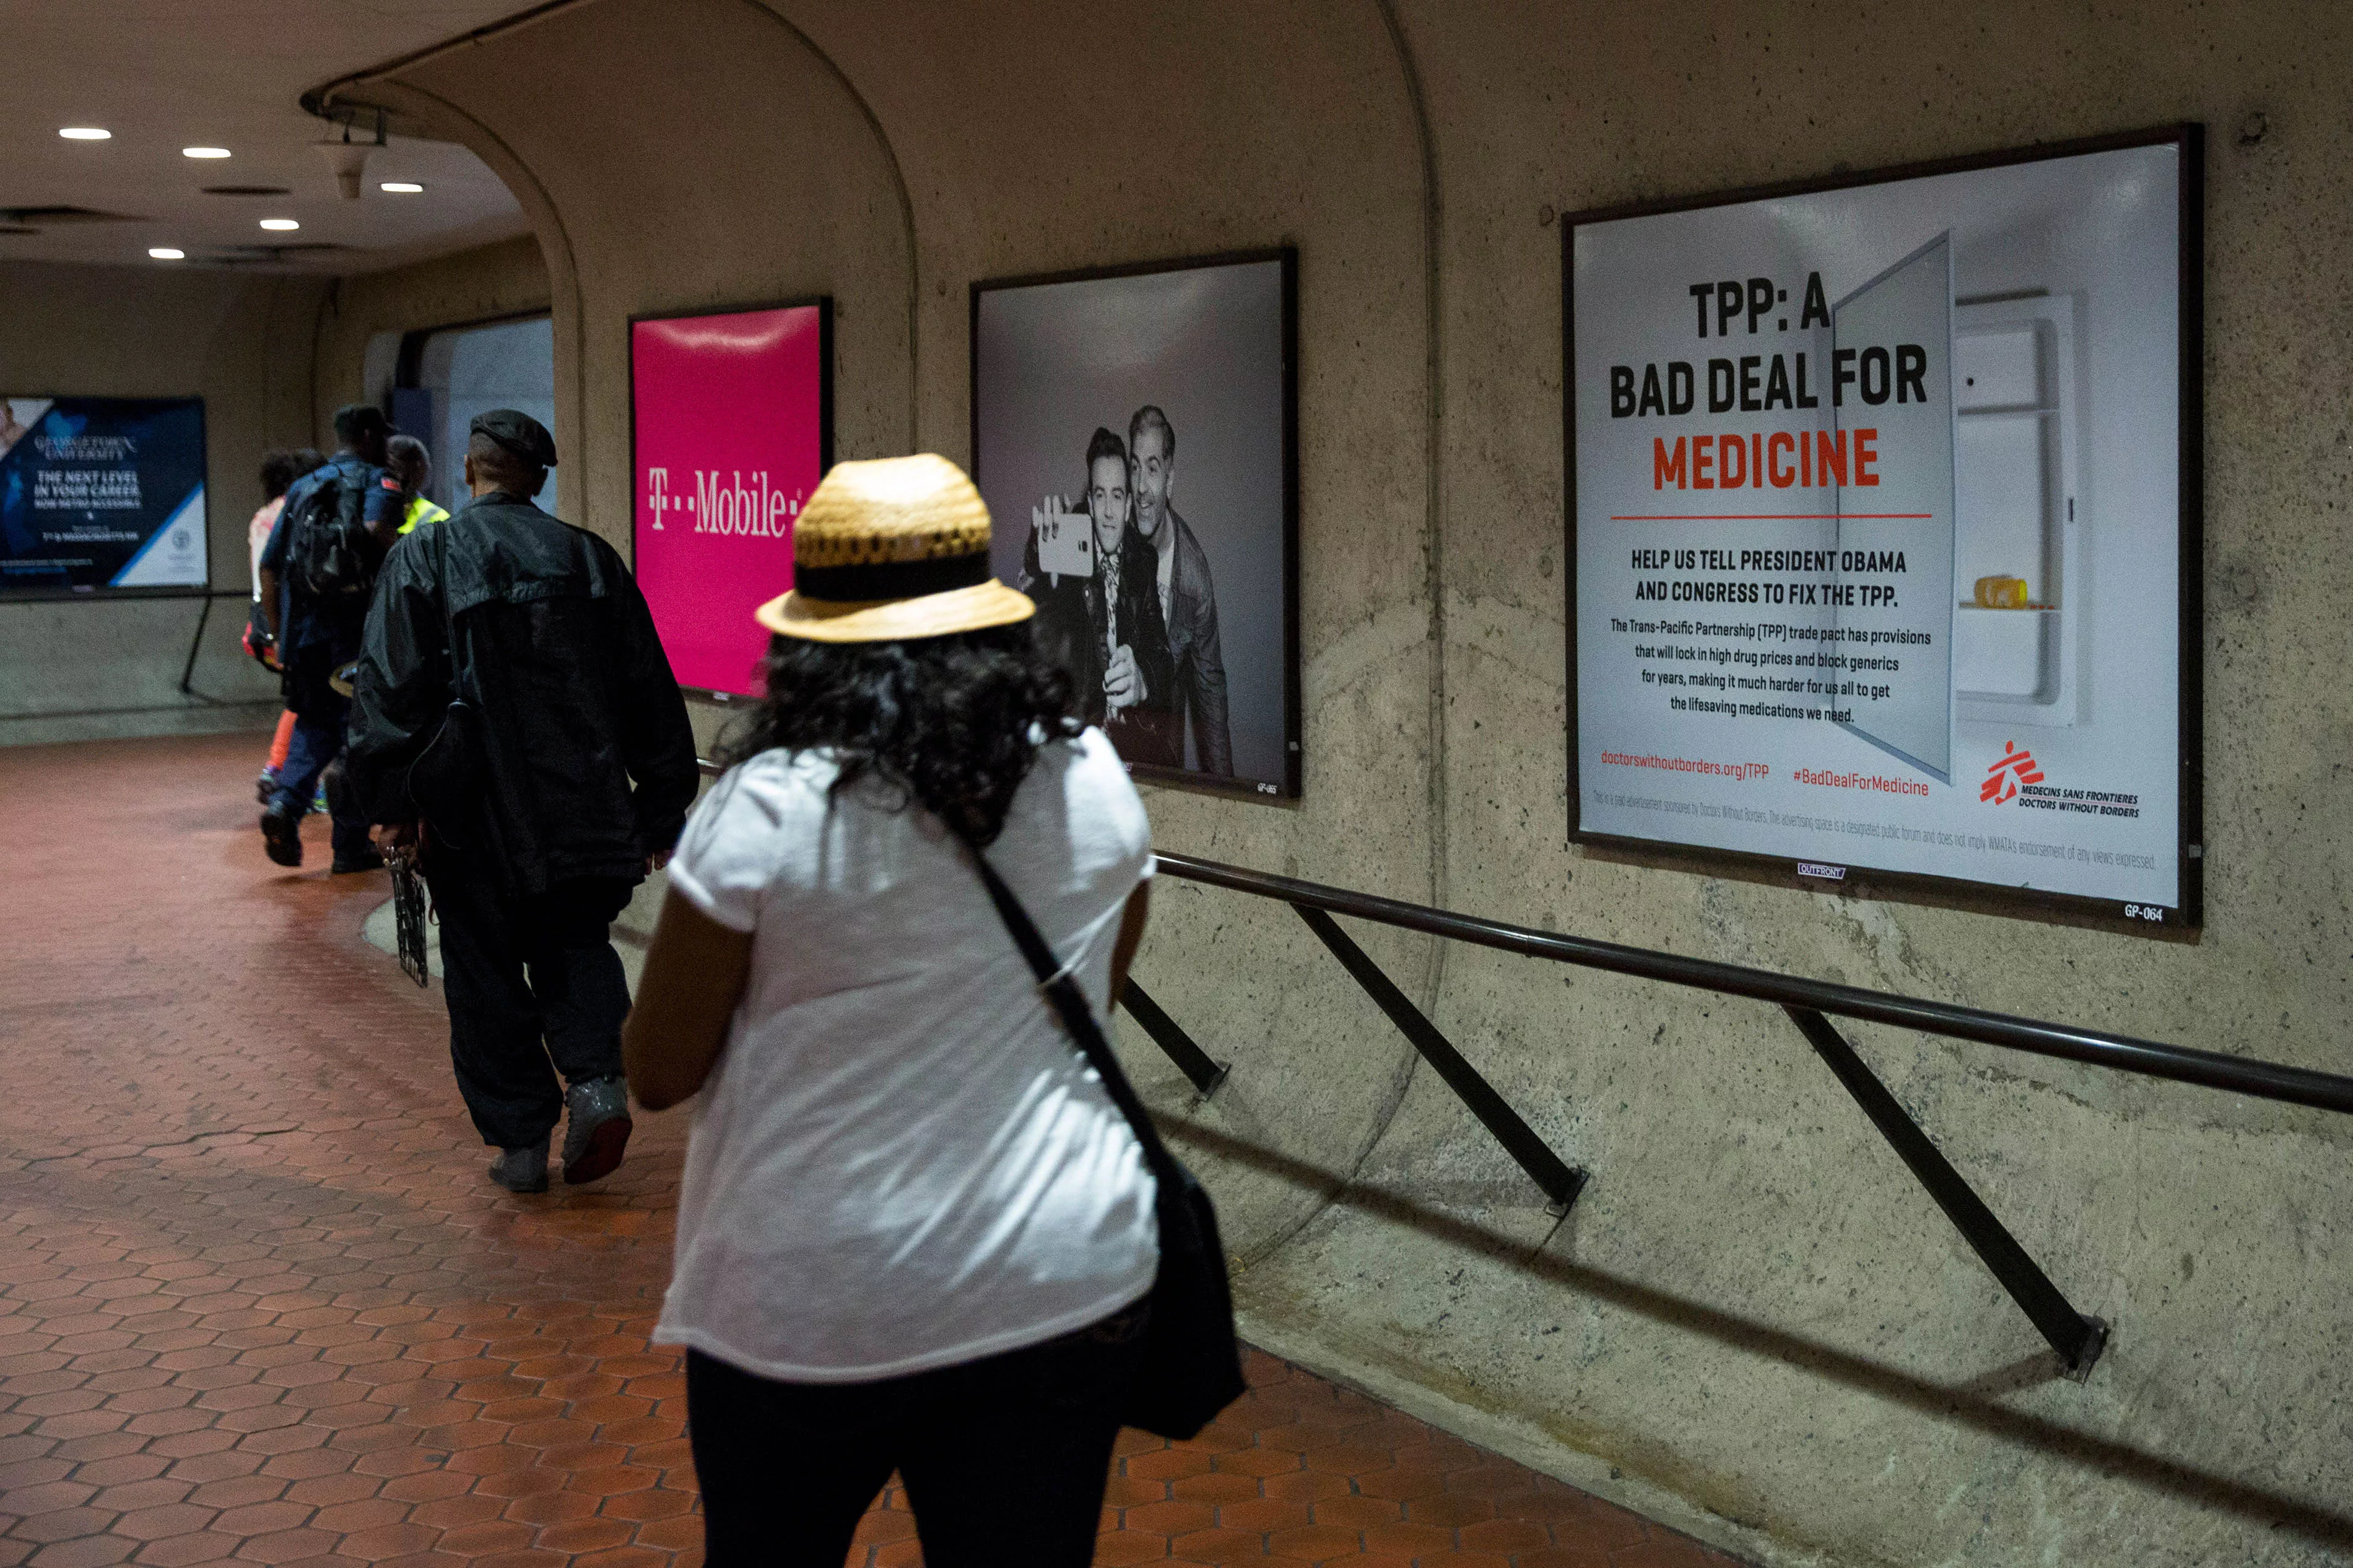 Metro advertisements for Doctors Without Borders